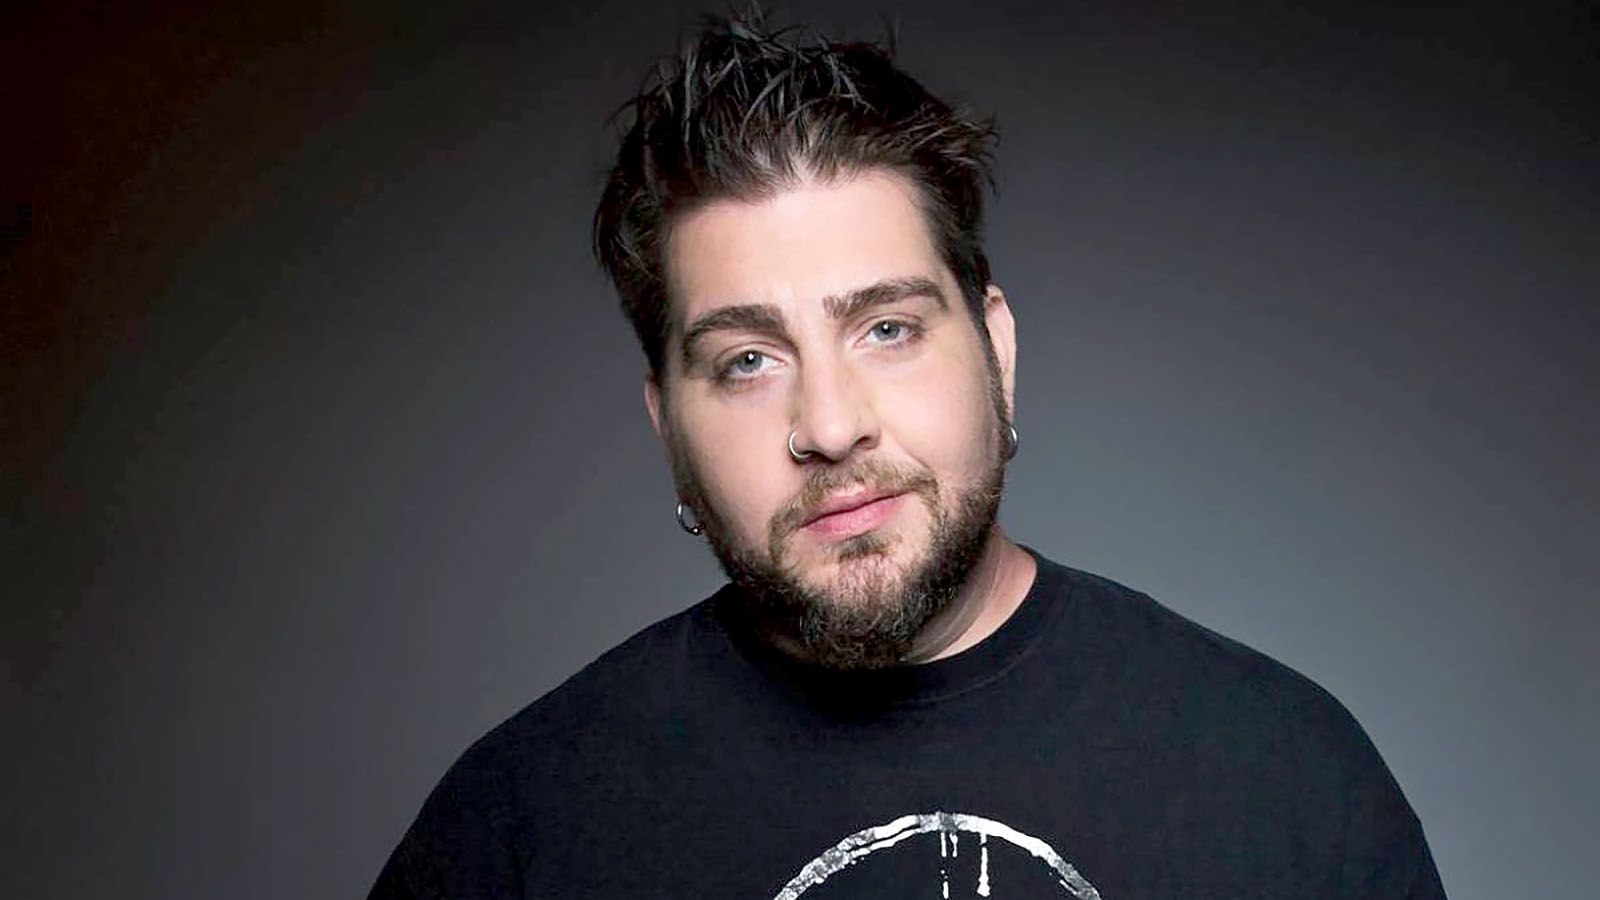 Big Jay Oakerson will be at Summit City Comedy Club for four shows, May 17-18.